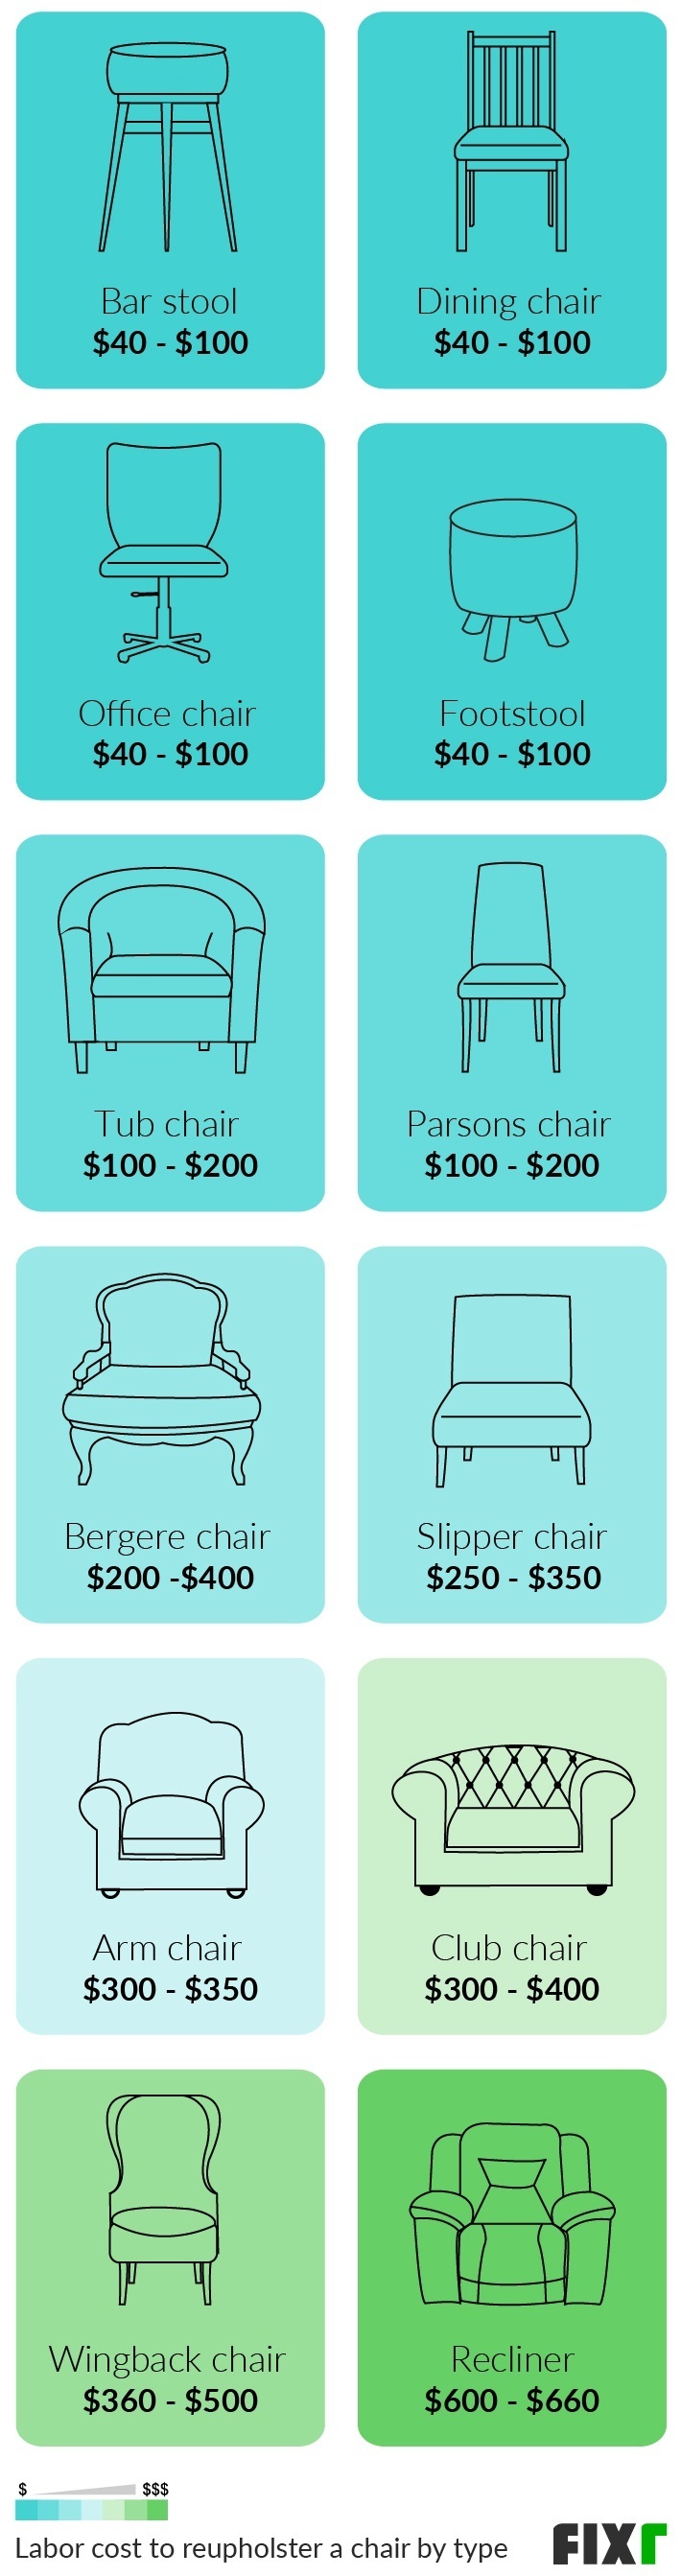 2021 Cost To Reupholster A Chair, How Much Does It Cost To Recover A Wingback Chair Uk